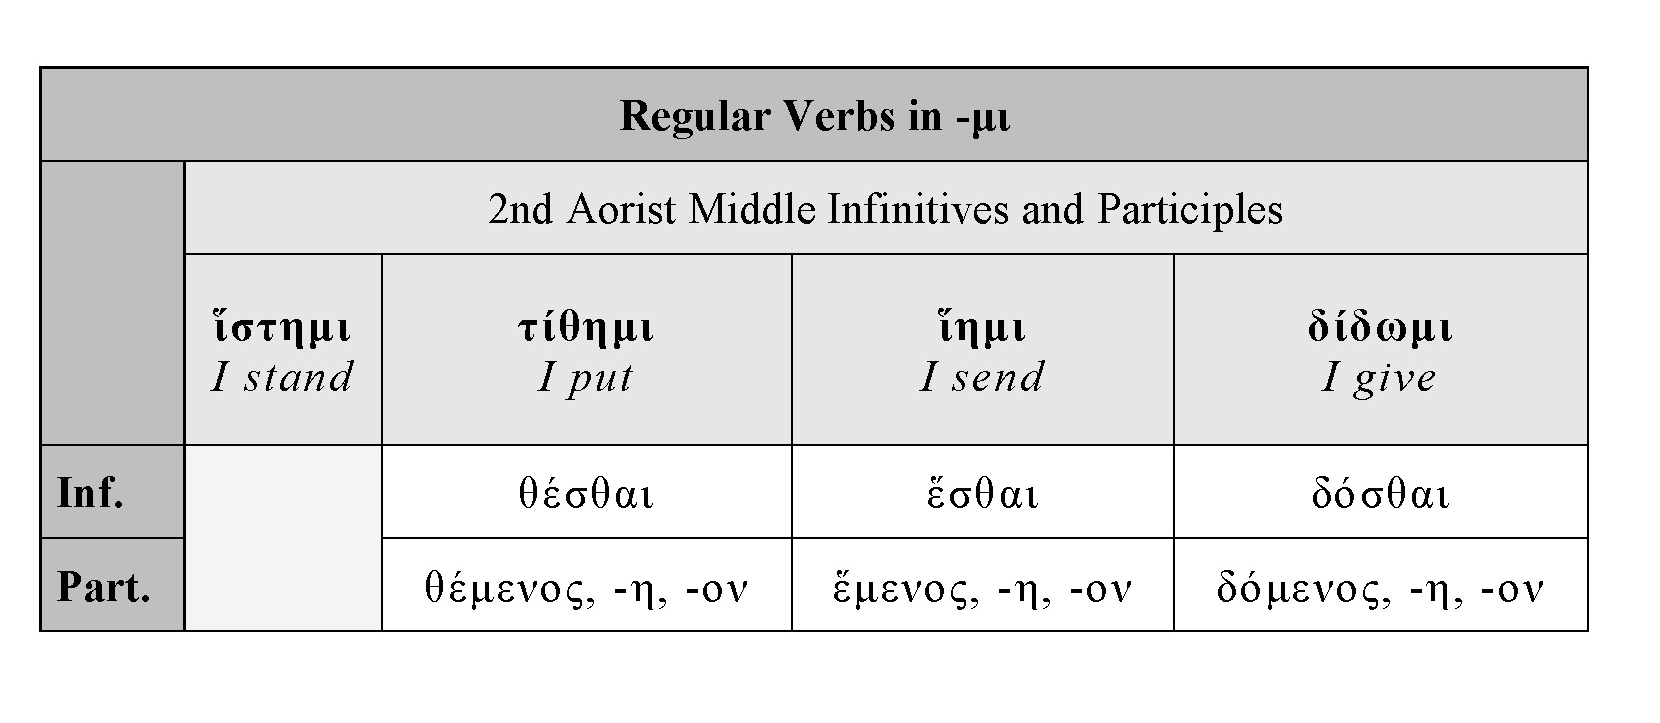 HOMERIC VERBS: -ΜΙ 2ND AORIST MIDDLE INFINITIVES AND PARTICIPLES